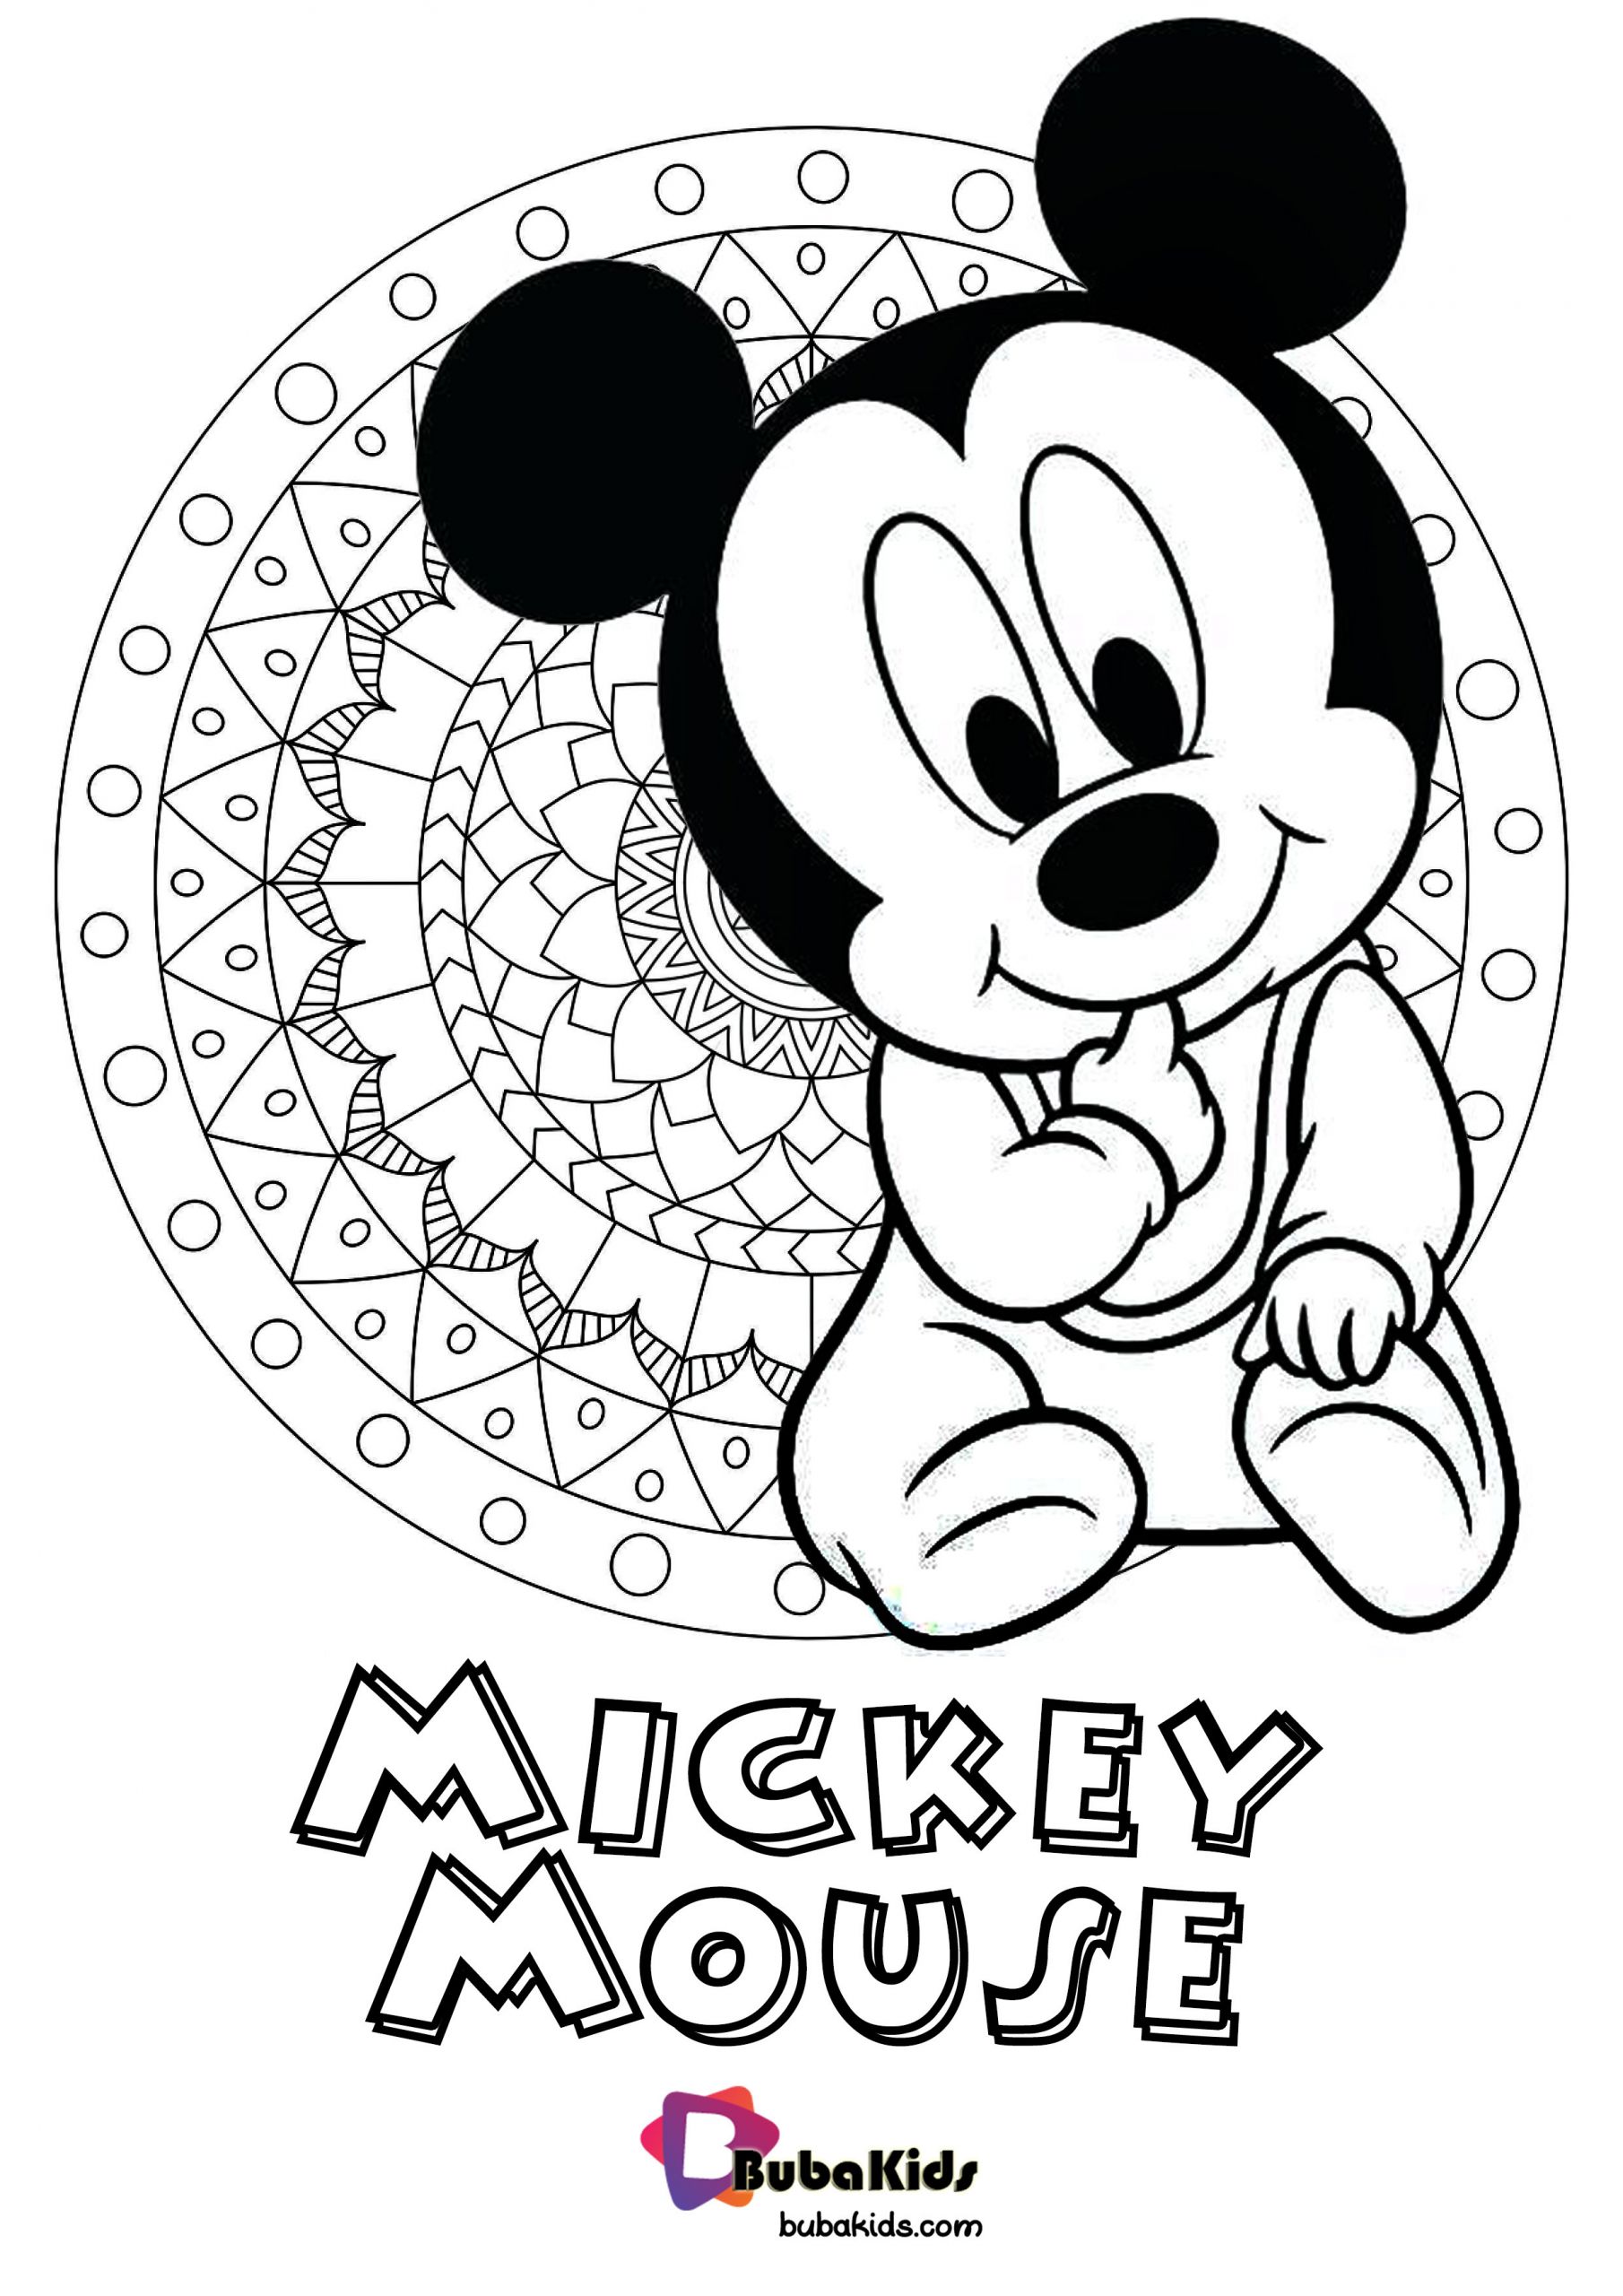 Baby Mickey Mouse Coloring Page
 Cute Baby Mickey Mouse Coloring Pages Printable Free